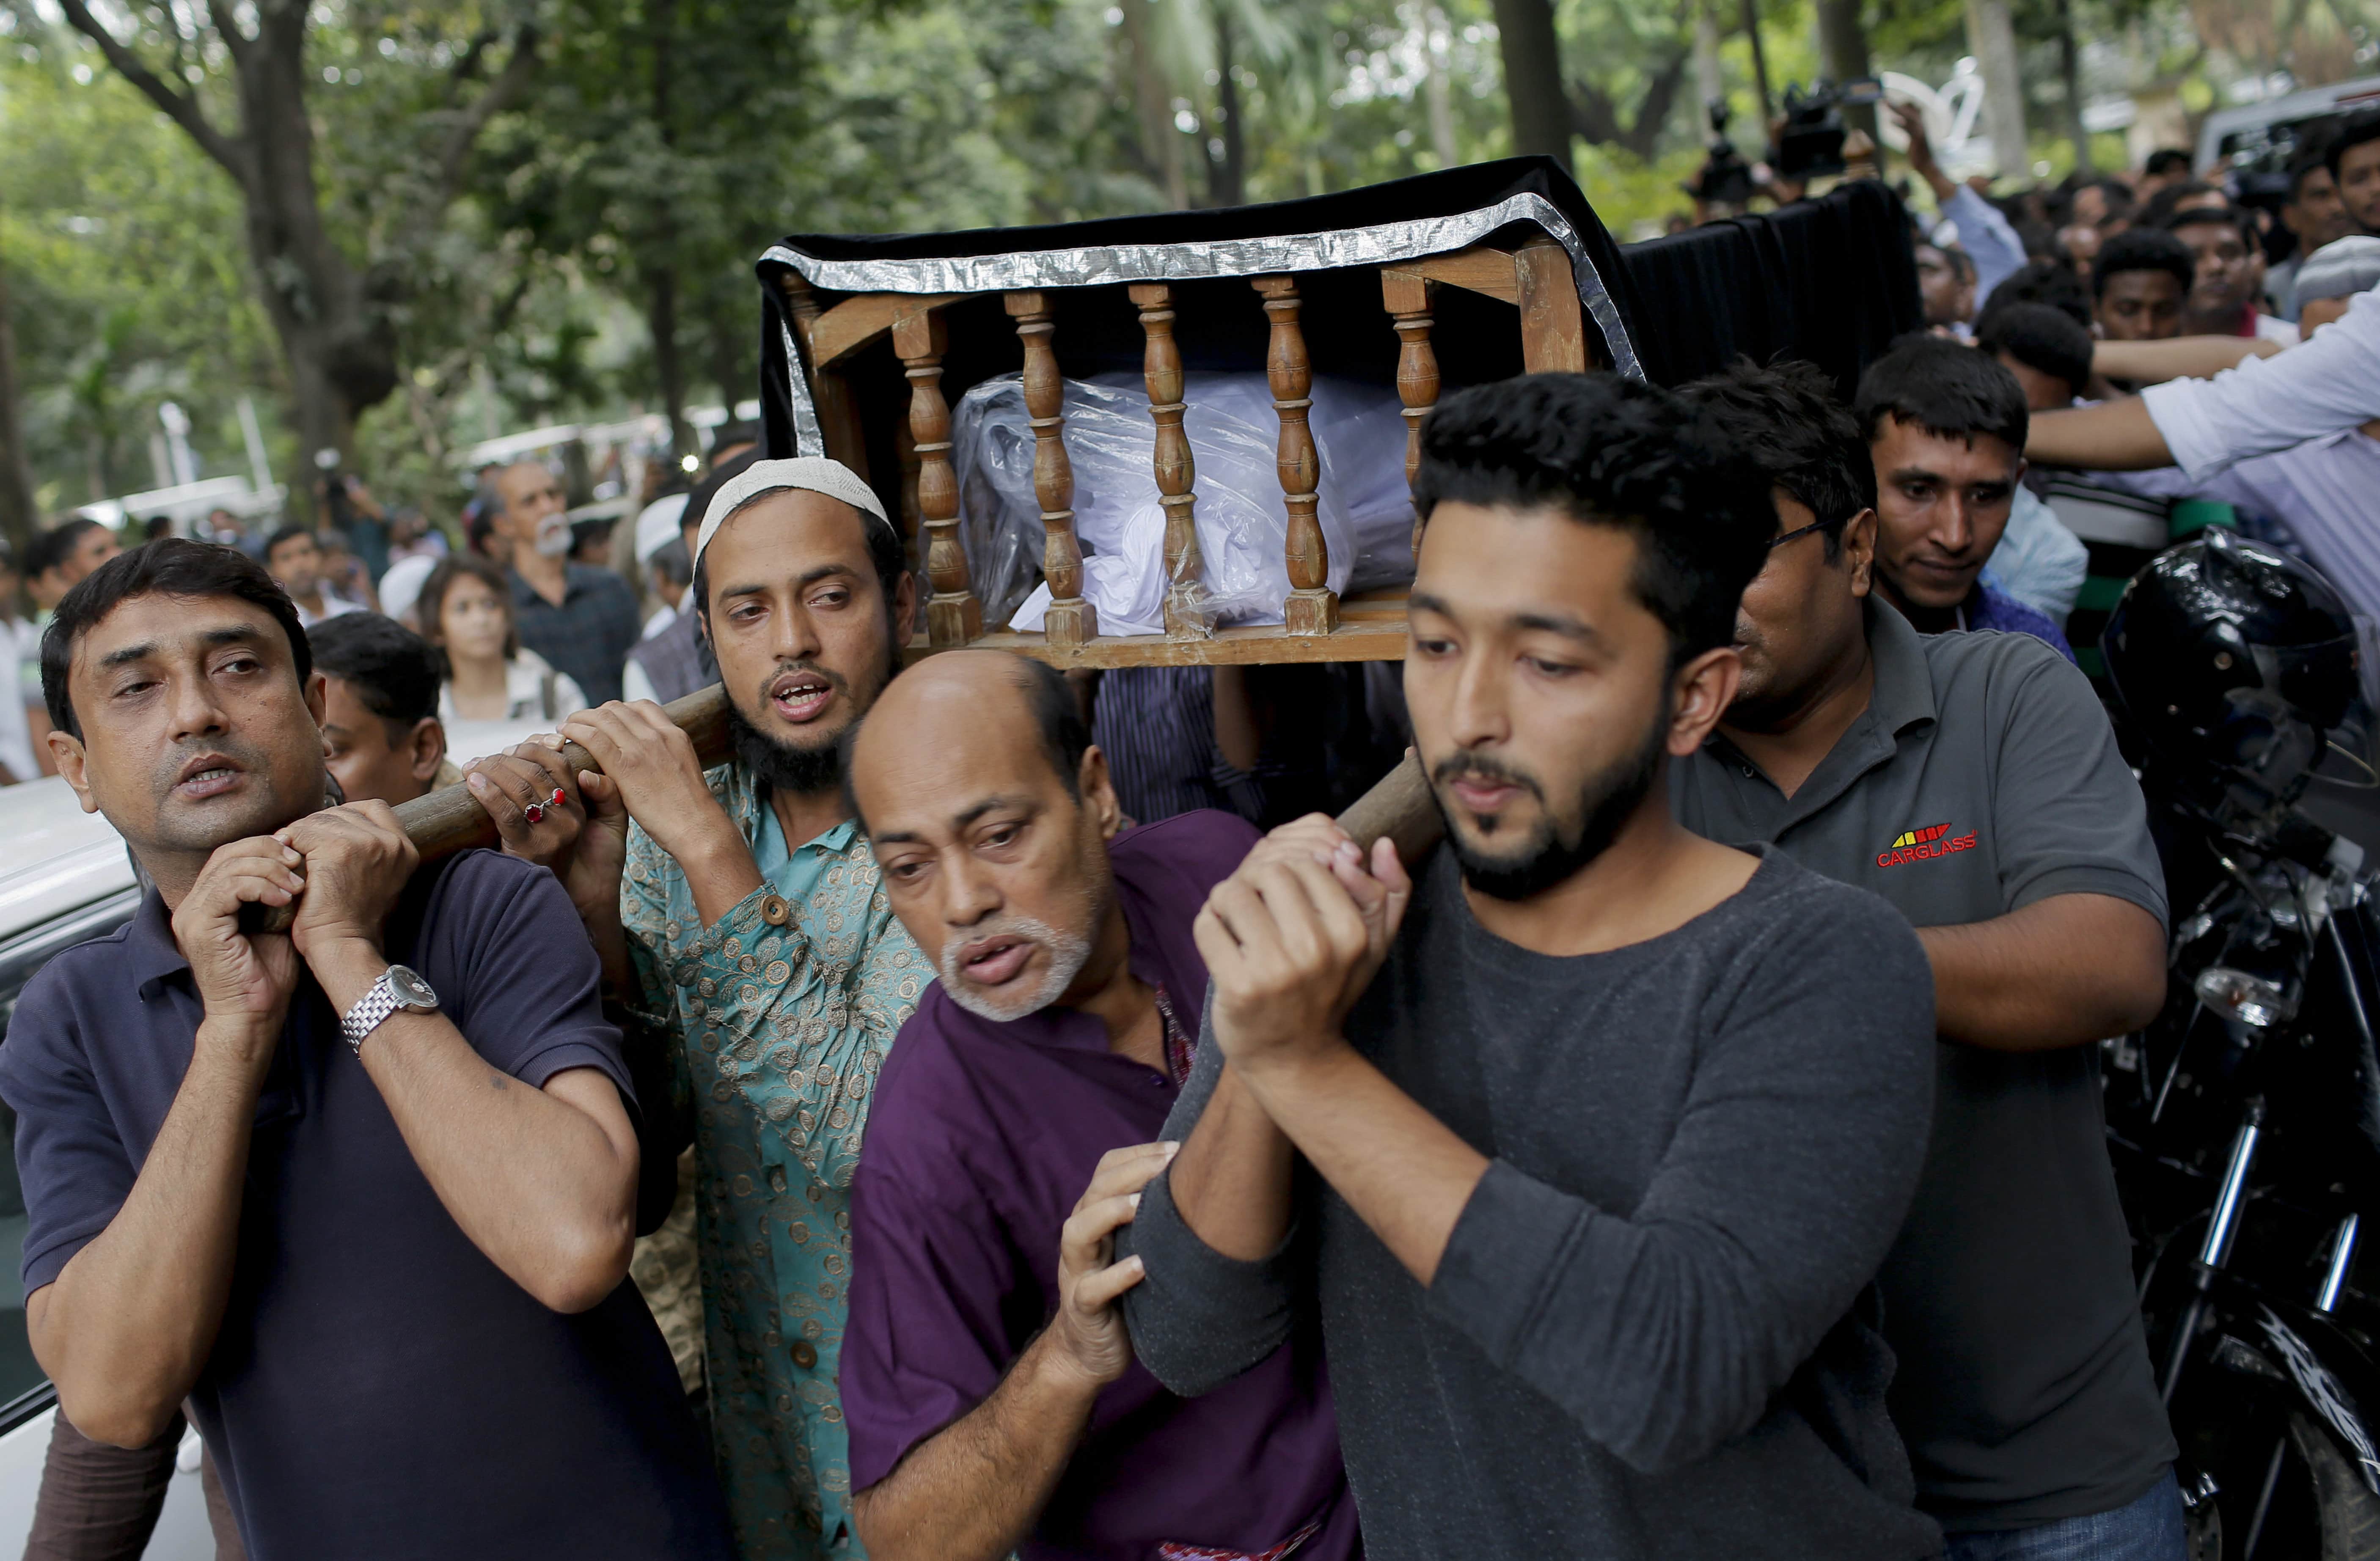 Pallbearers carry the body of Faisal Arefin Deepan, a publisher of secular books, during his funeral in Dhaka, Bangladesh, 1 November 2015. Deepan was hacked to death and three other people wounded in attacks in Bangladesh's capital that were claimed by Muslim radicals., A.M. Ahad